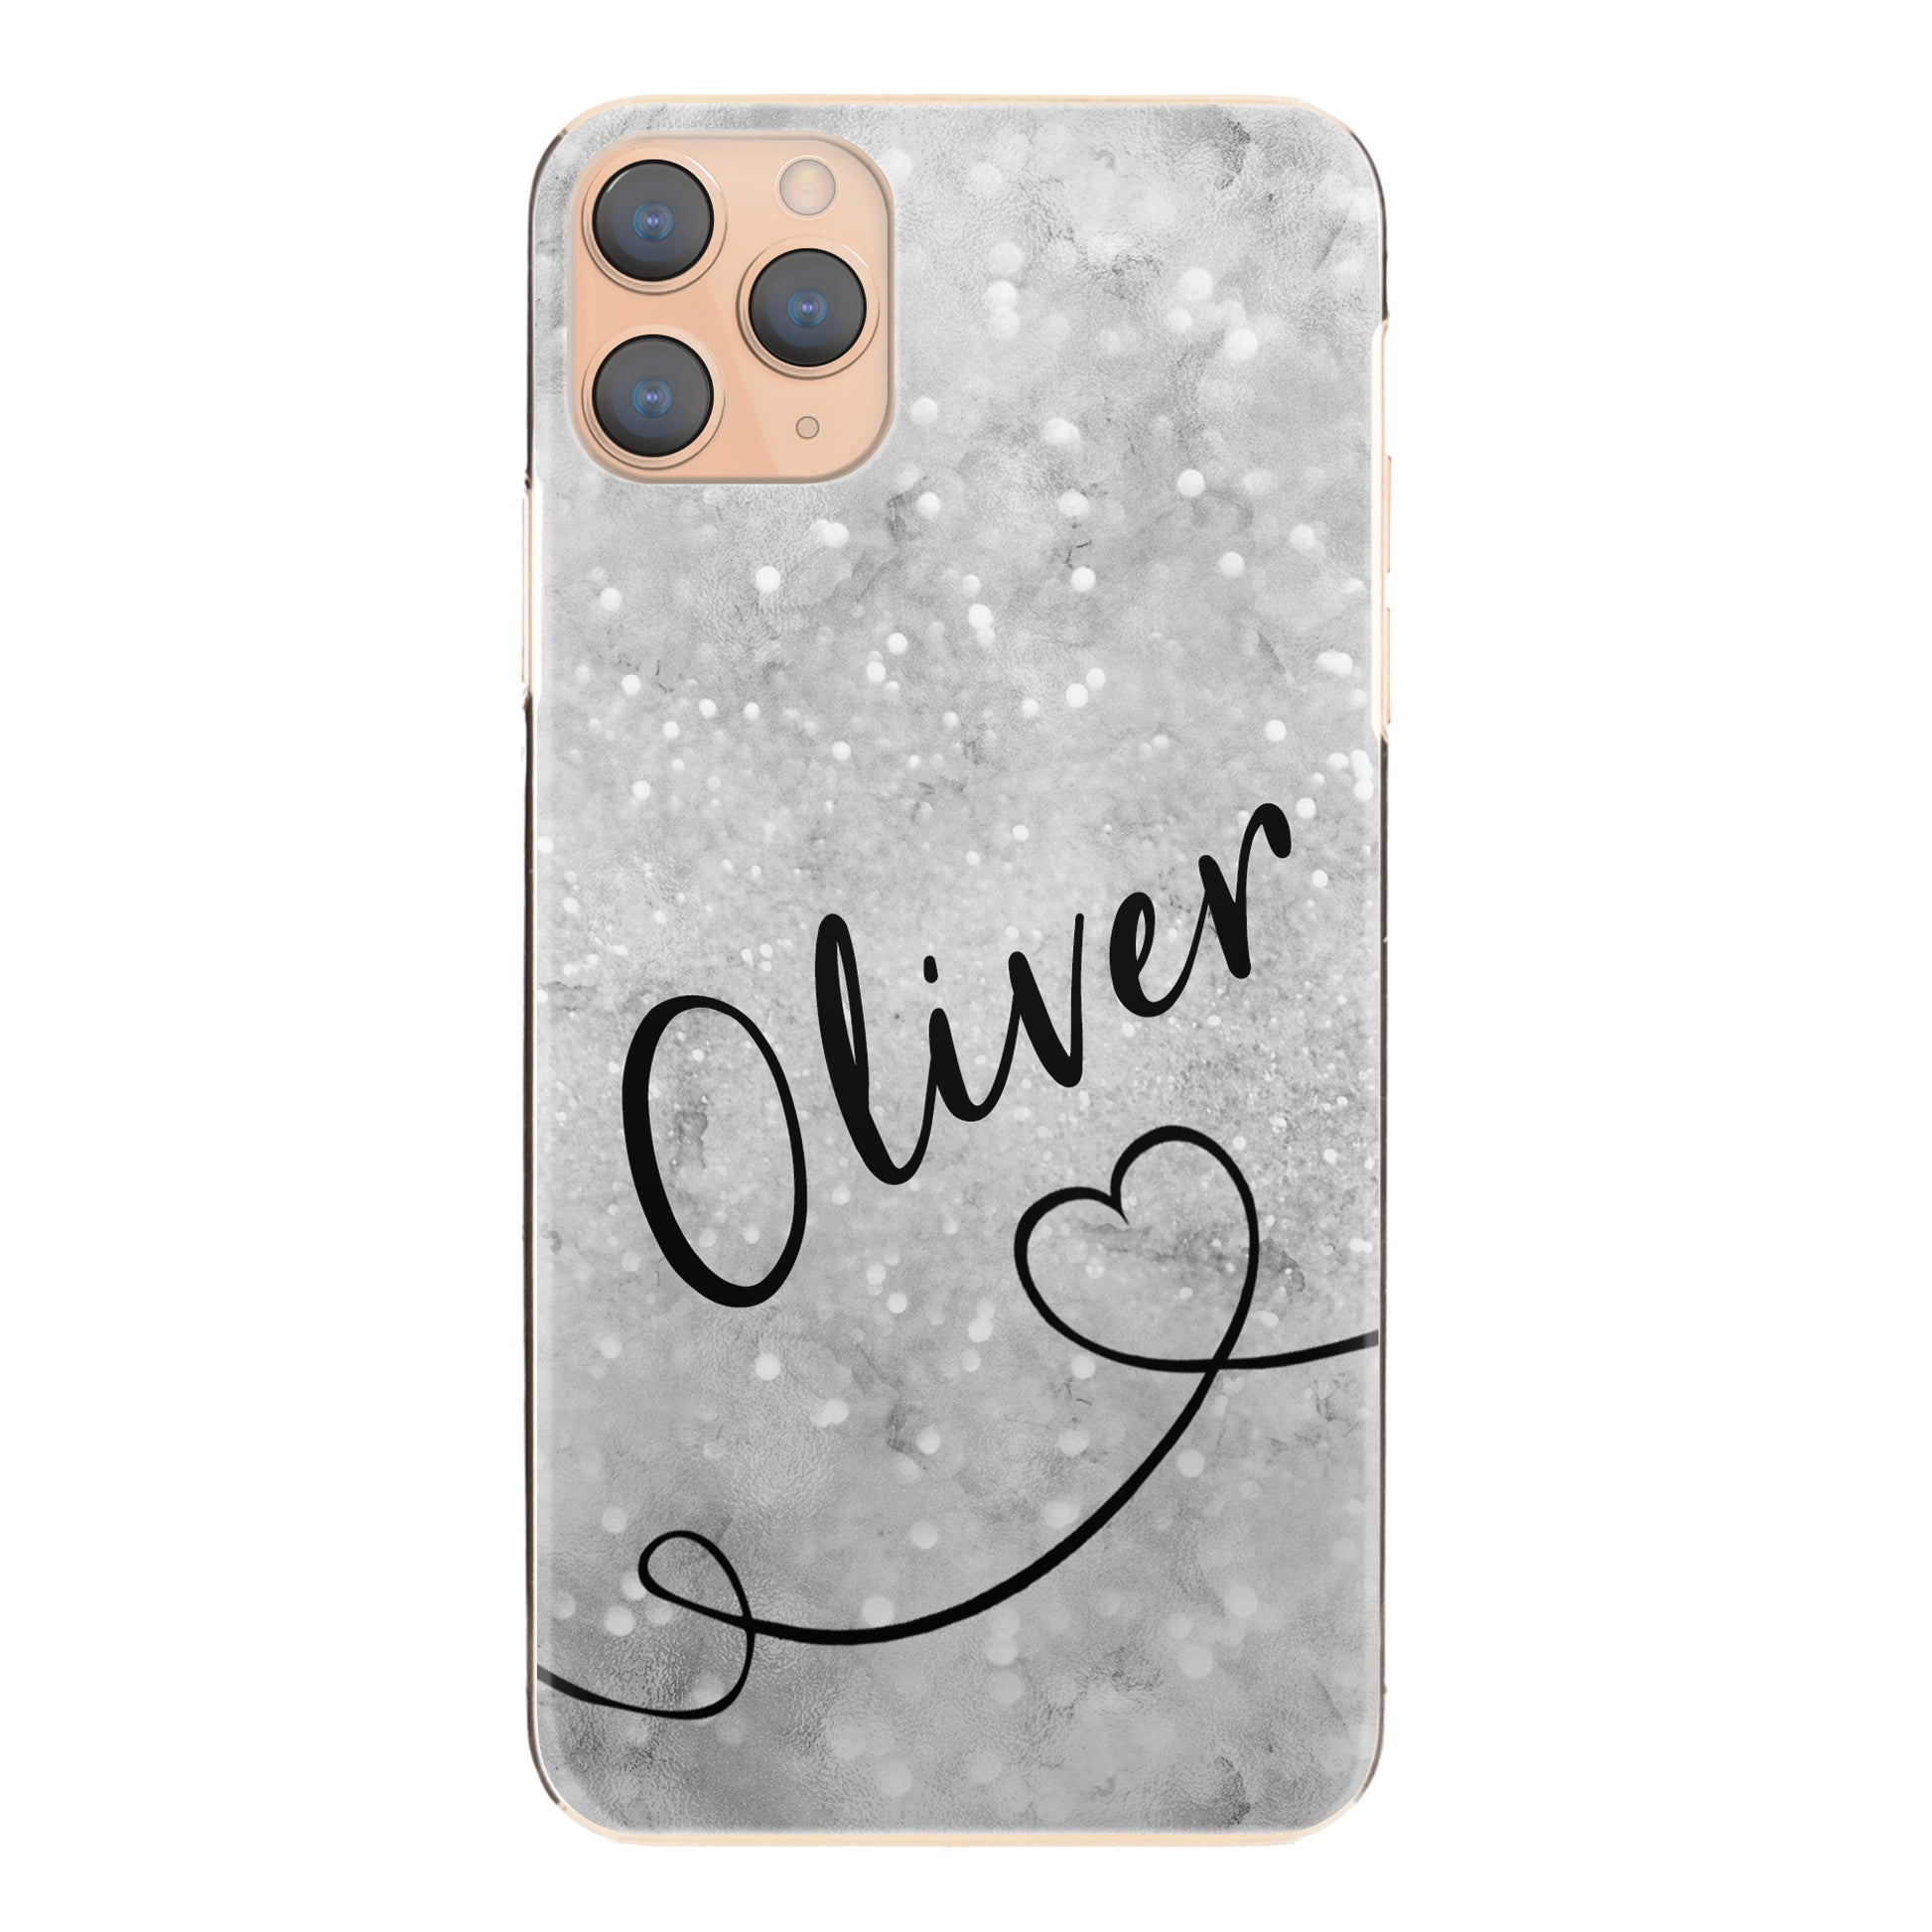 Personalised Motorola Phone Hard Case with Stylish Text and Heart Line on Textured Grey